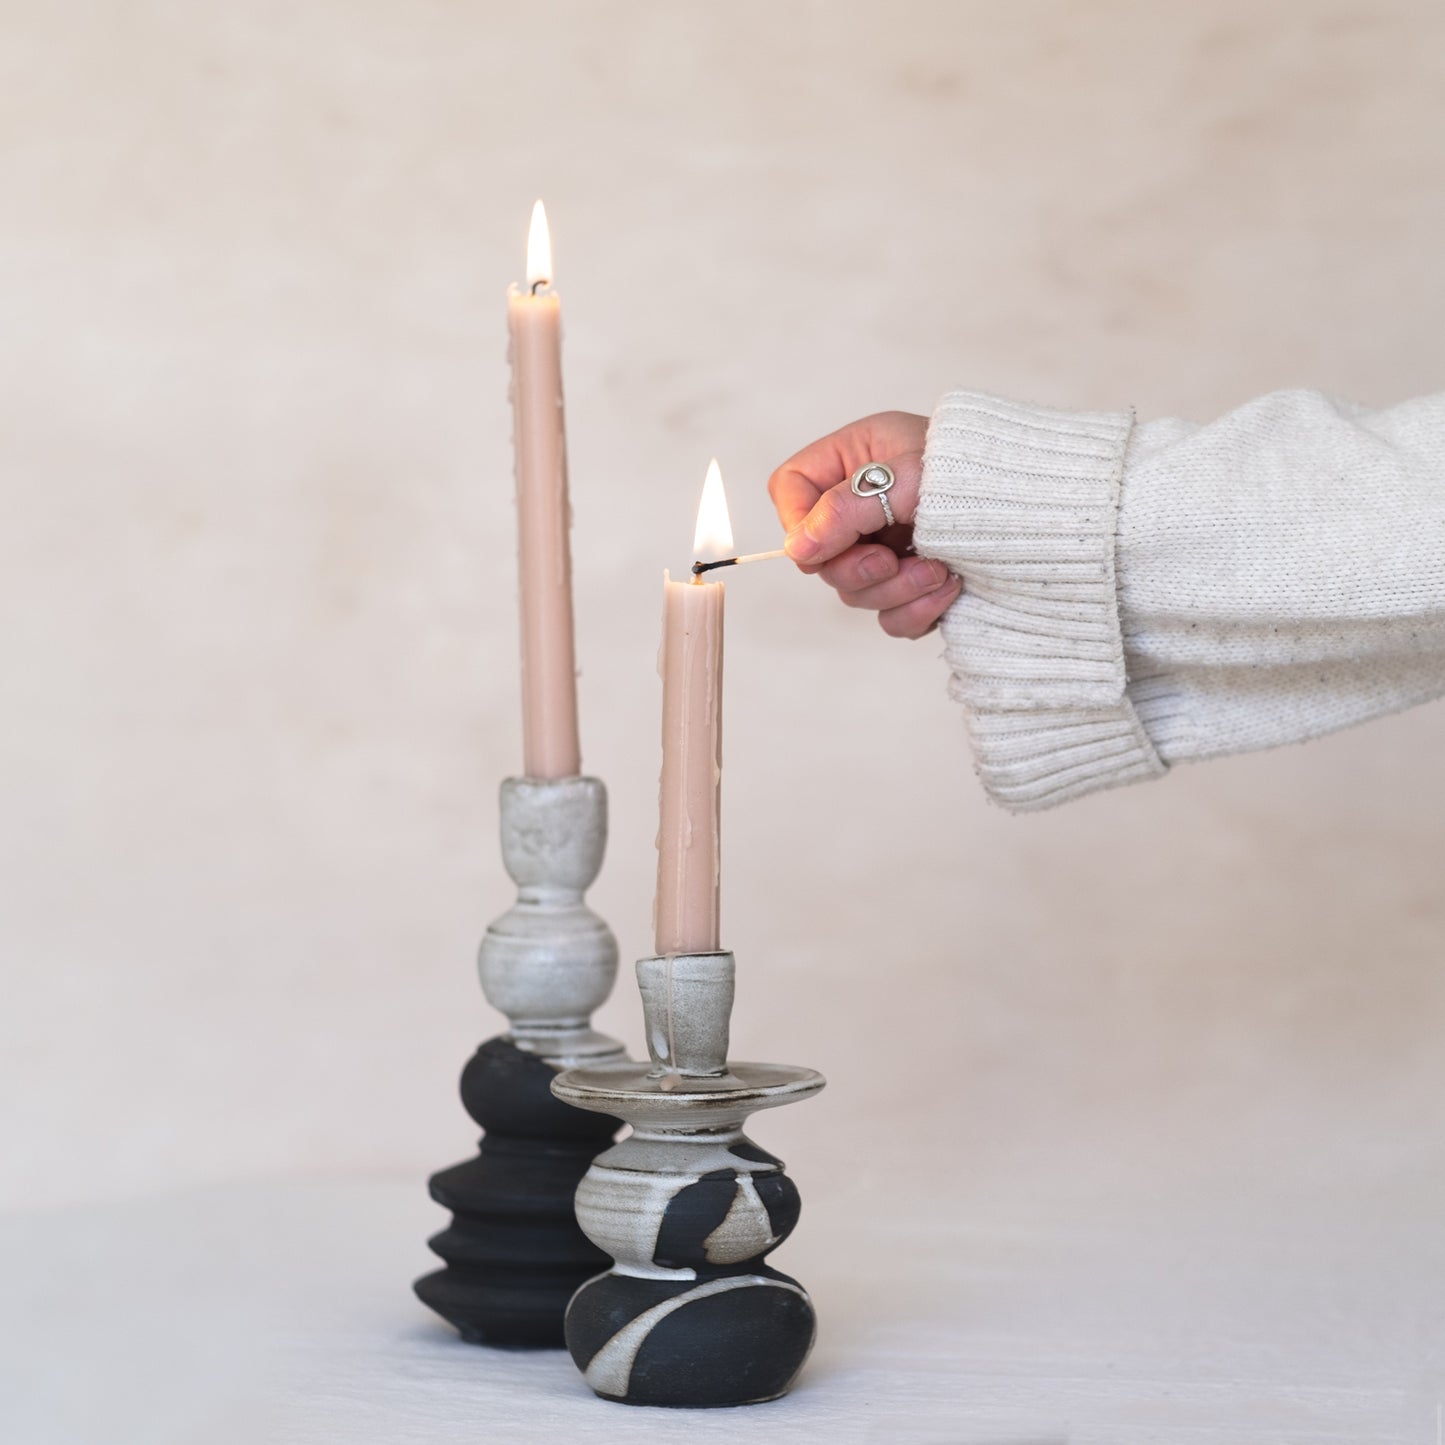 Ceramic Candlesticks beautifully handmade embracing the wabi sabi style. A hand reaches in to light the tapered candle on the right